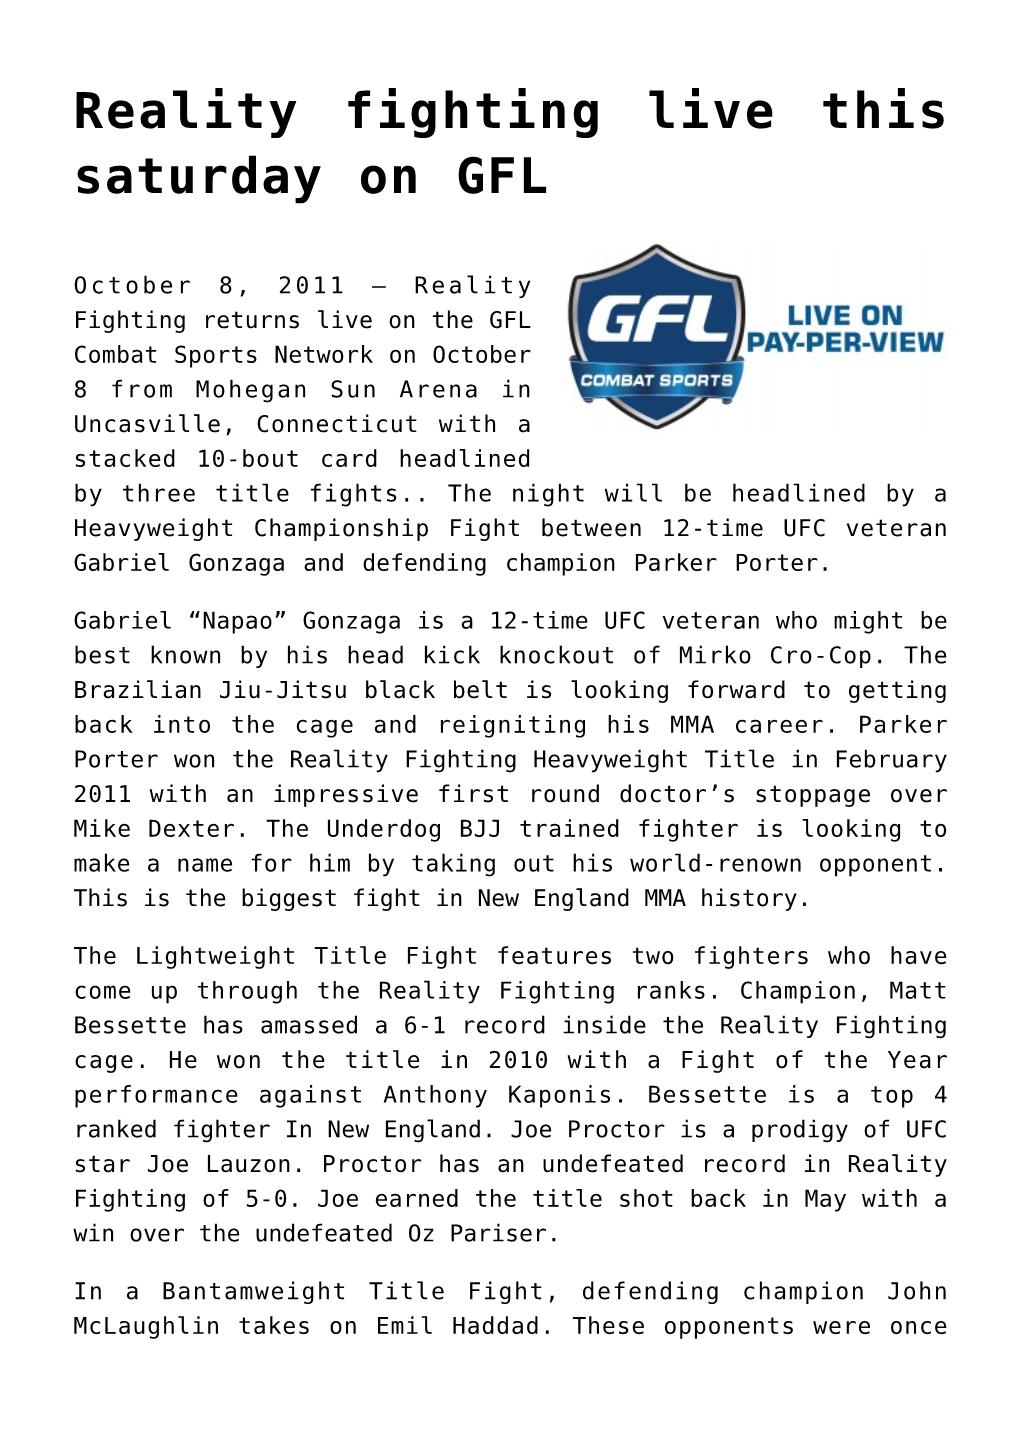 Reality Fighting Live This Saturday on GFL